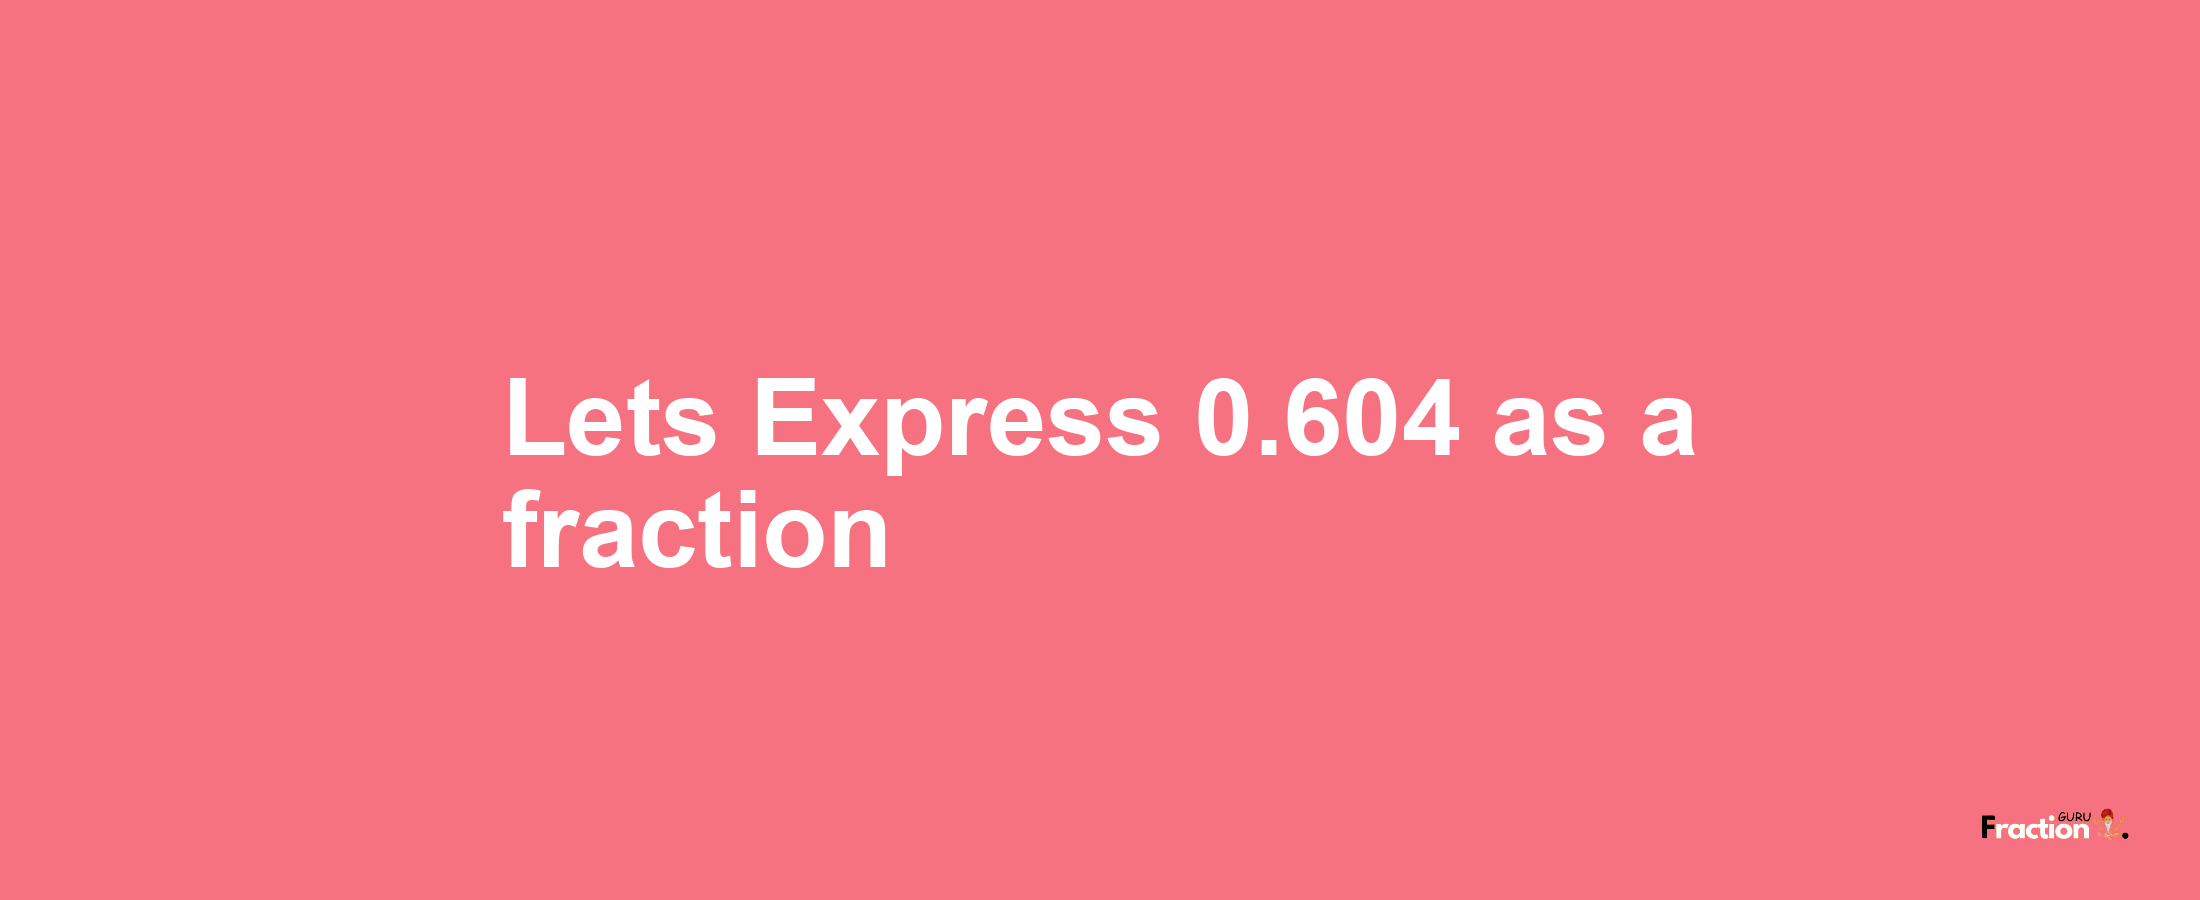 Lets Express 0.604 as afraction